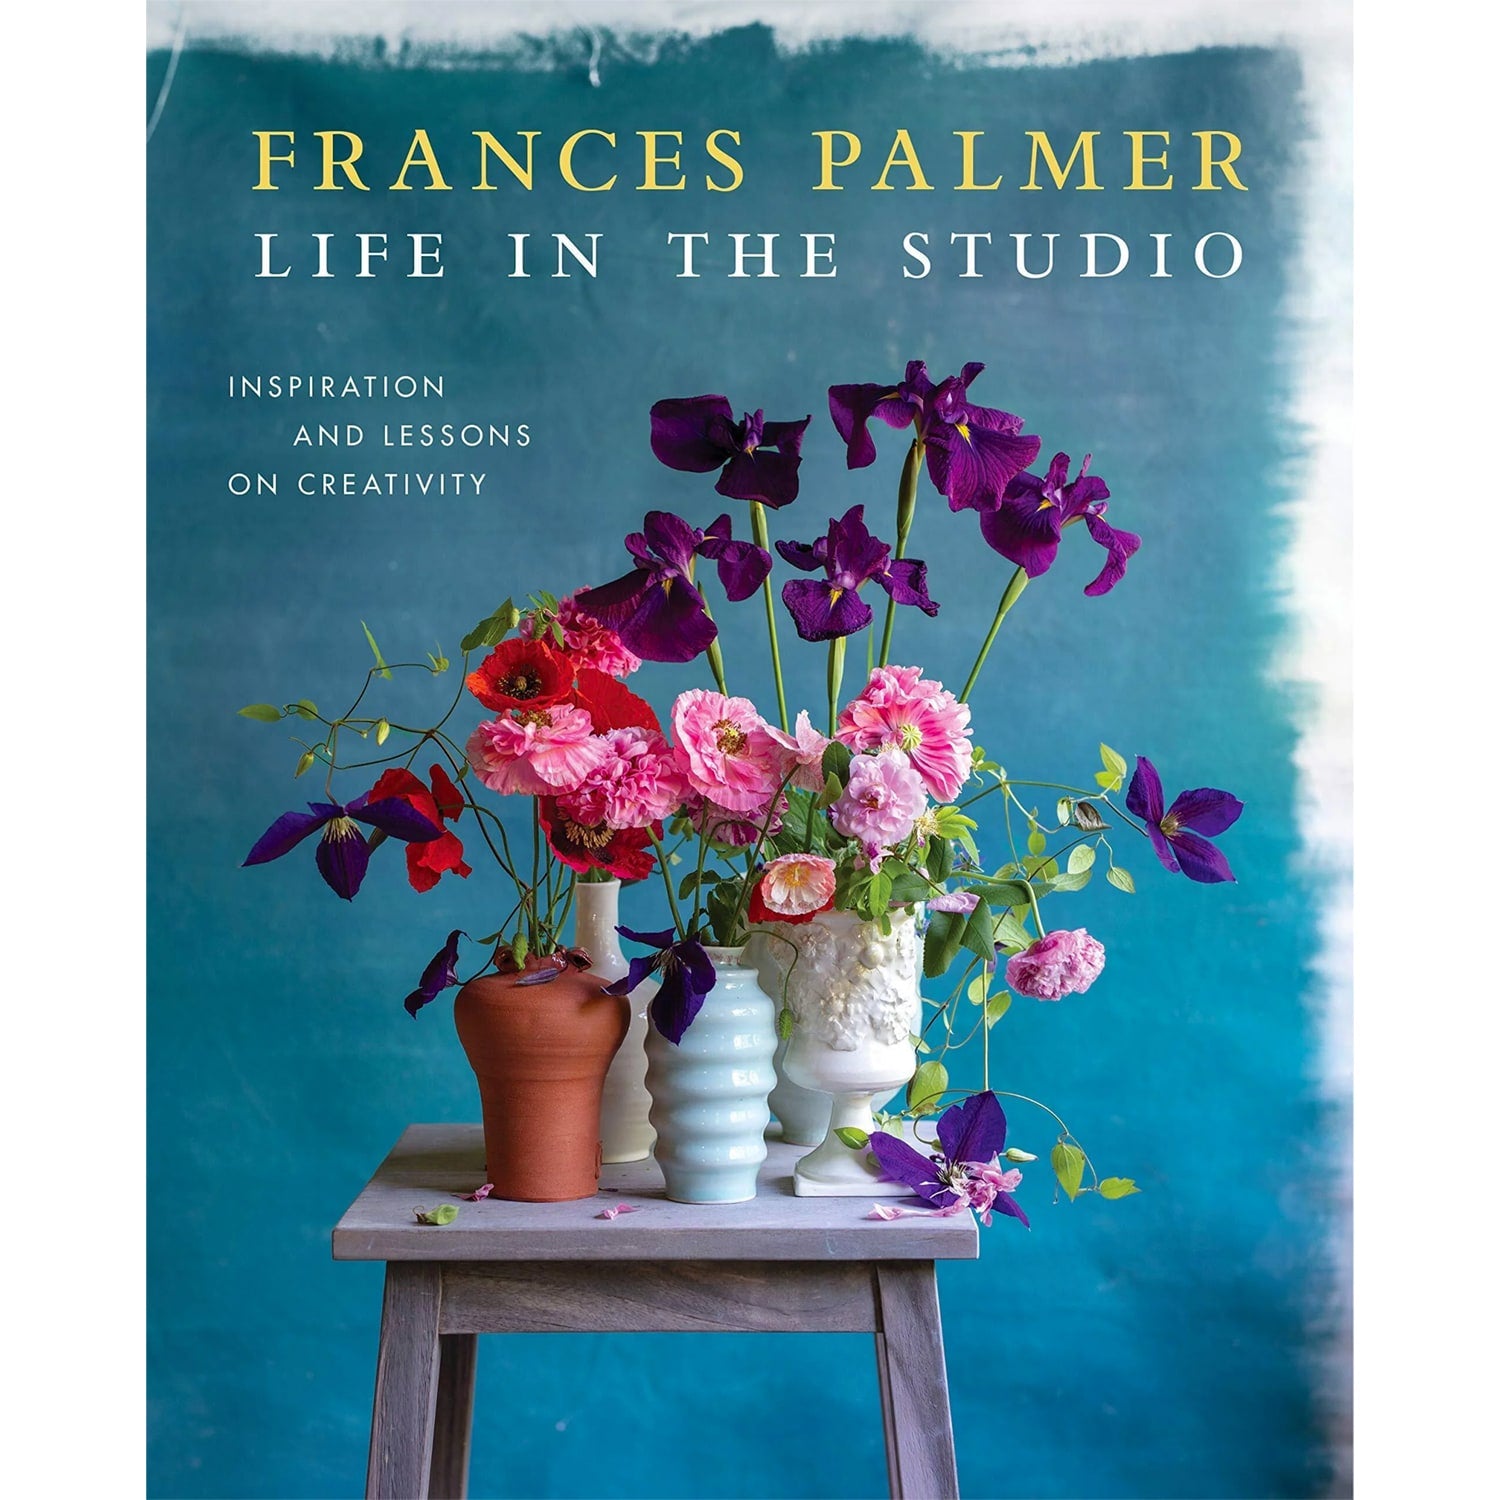 Steel Blue "Life in the Studio: Inspiration and Lessons on Creativity" Frances Palmer